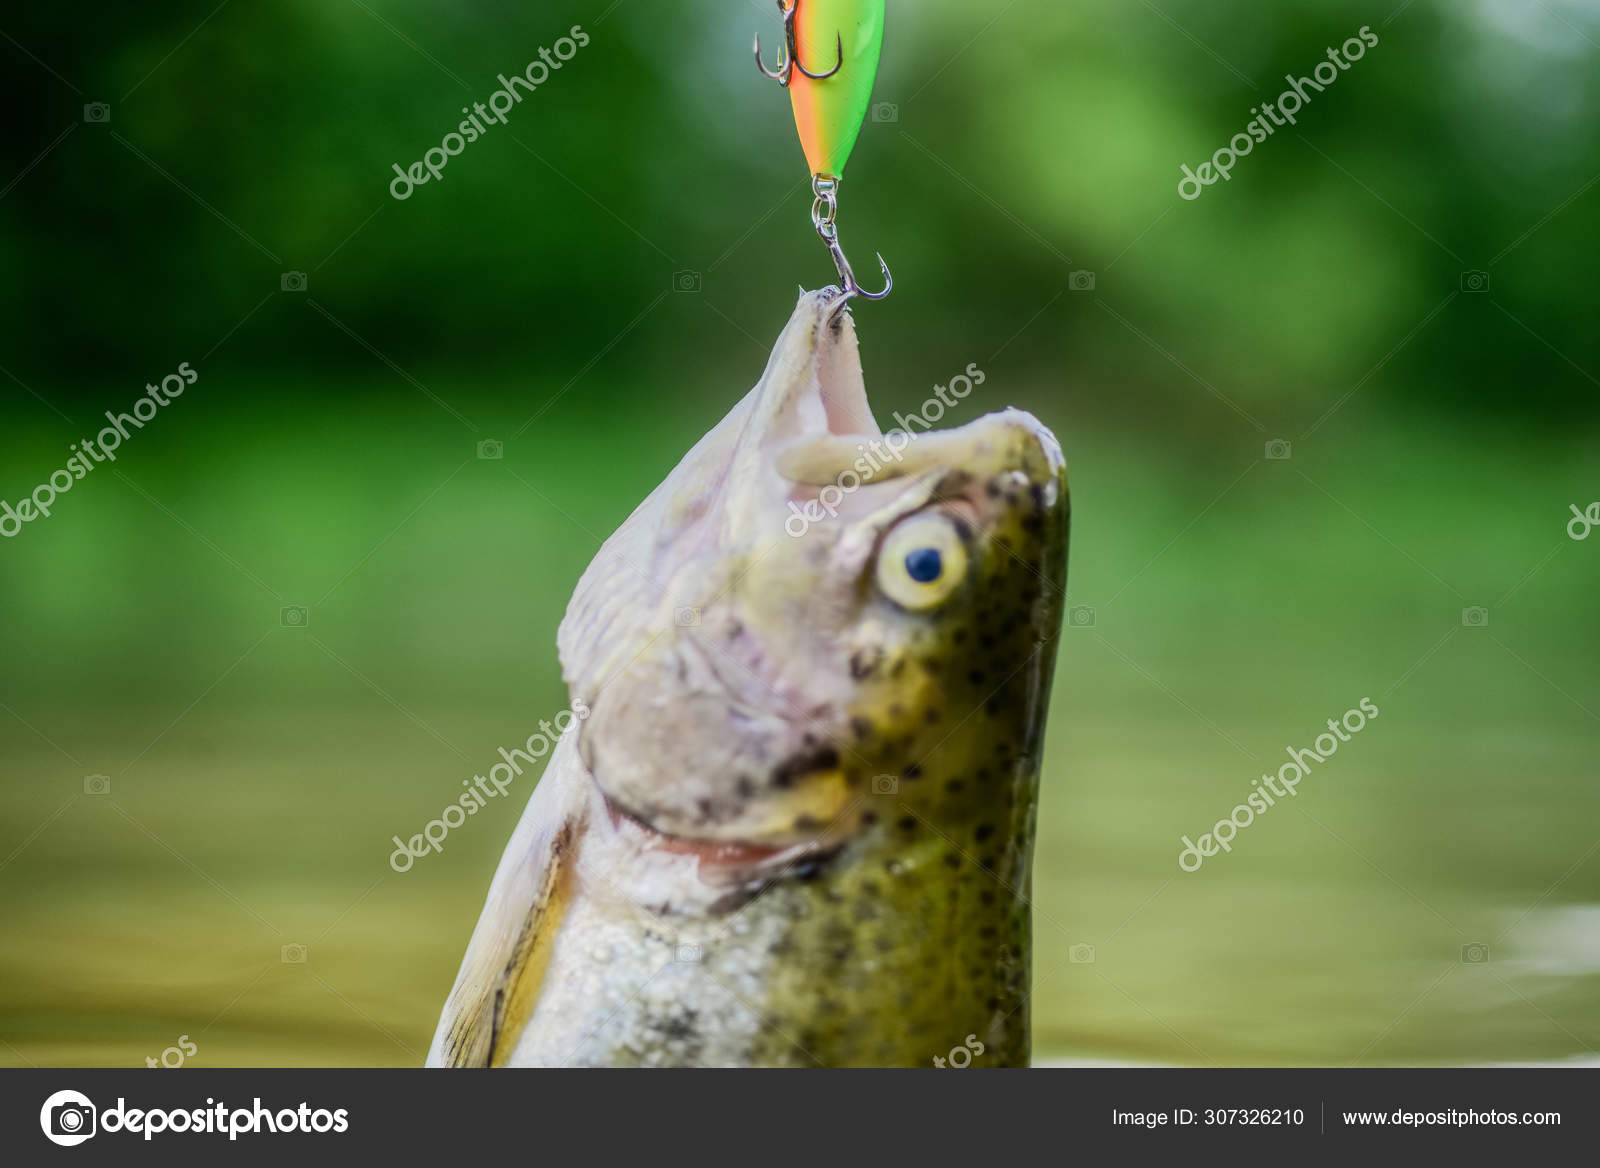 Fish trout caught in freshwater. Bait spoon line fishing